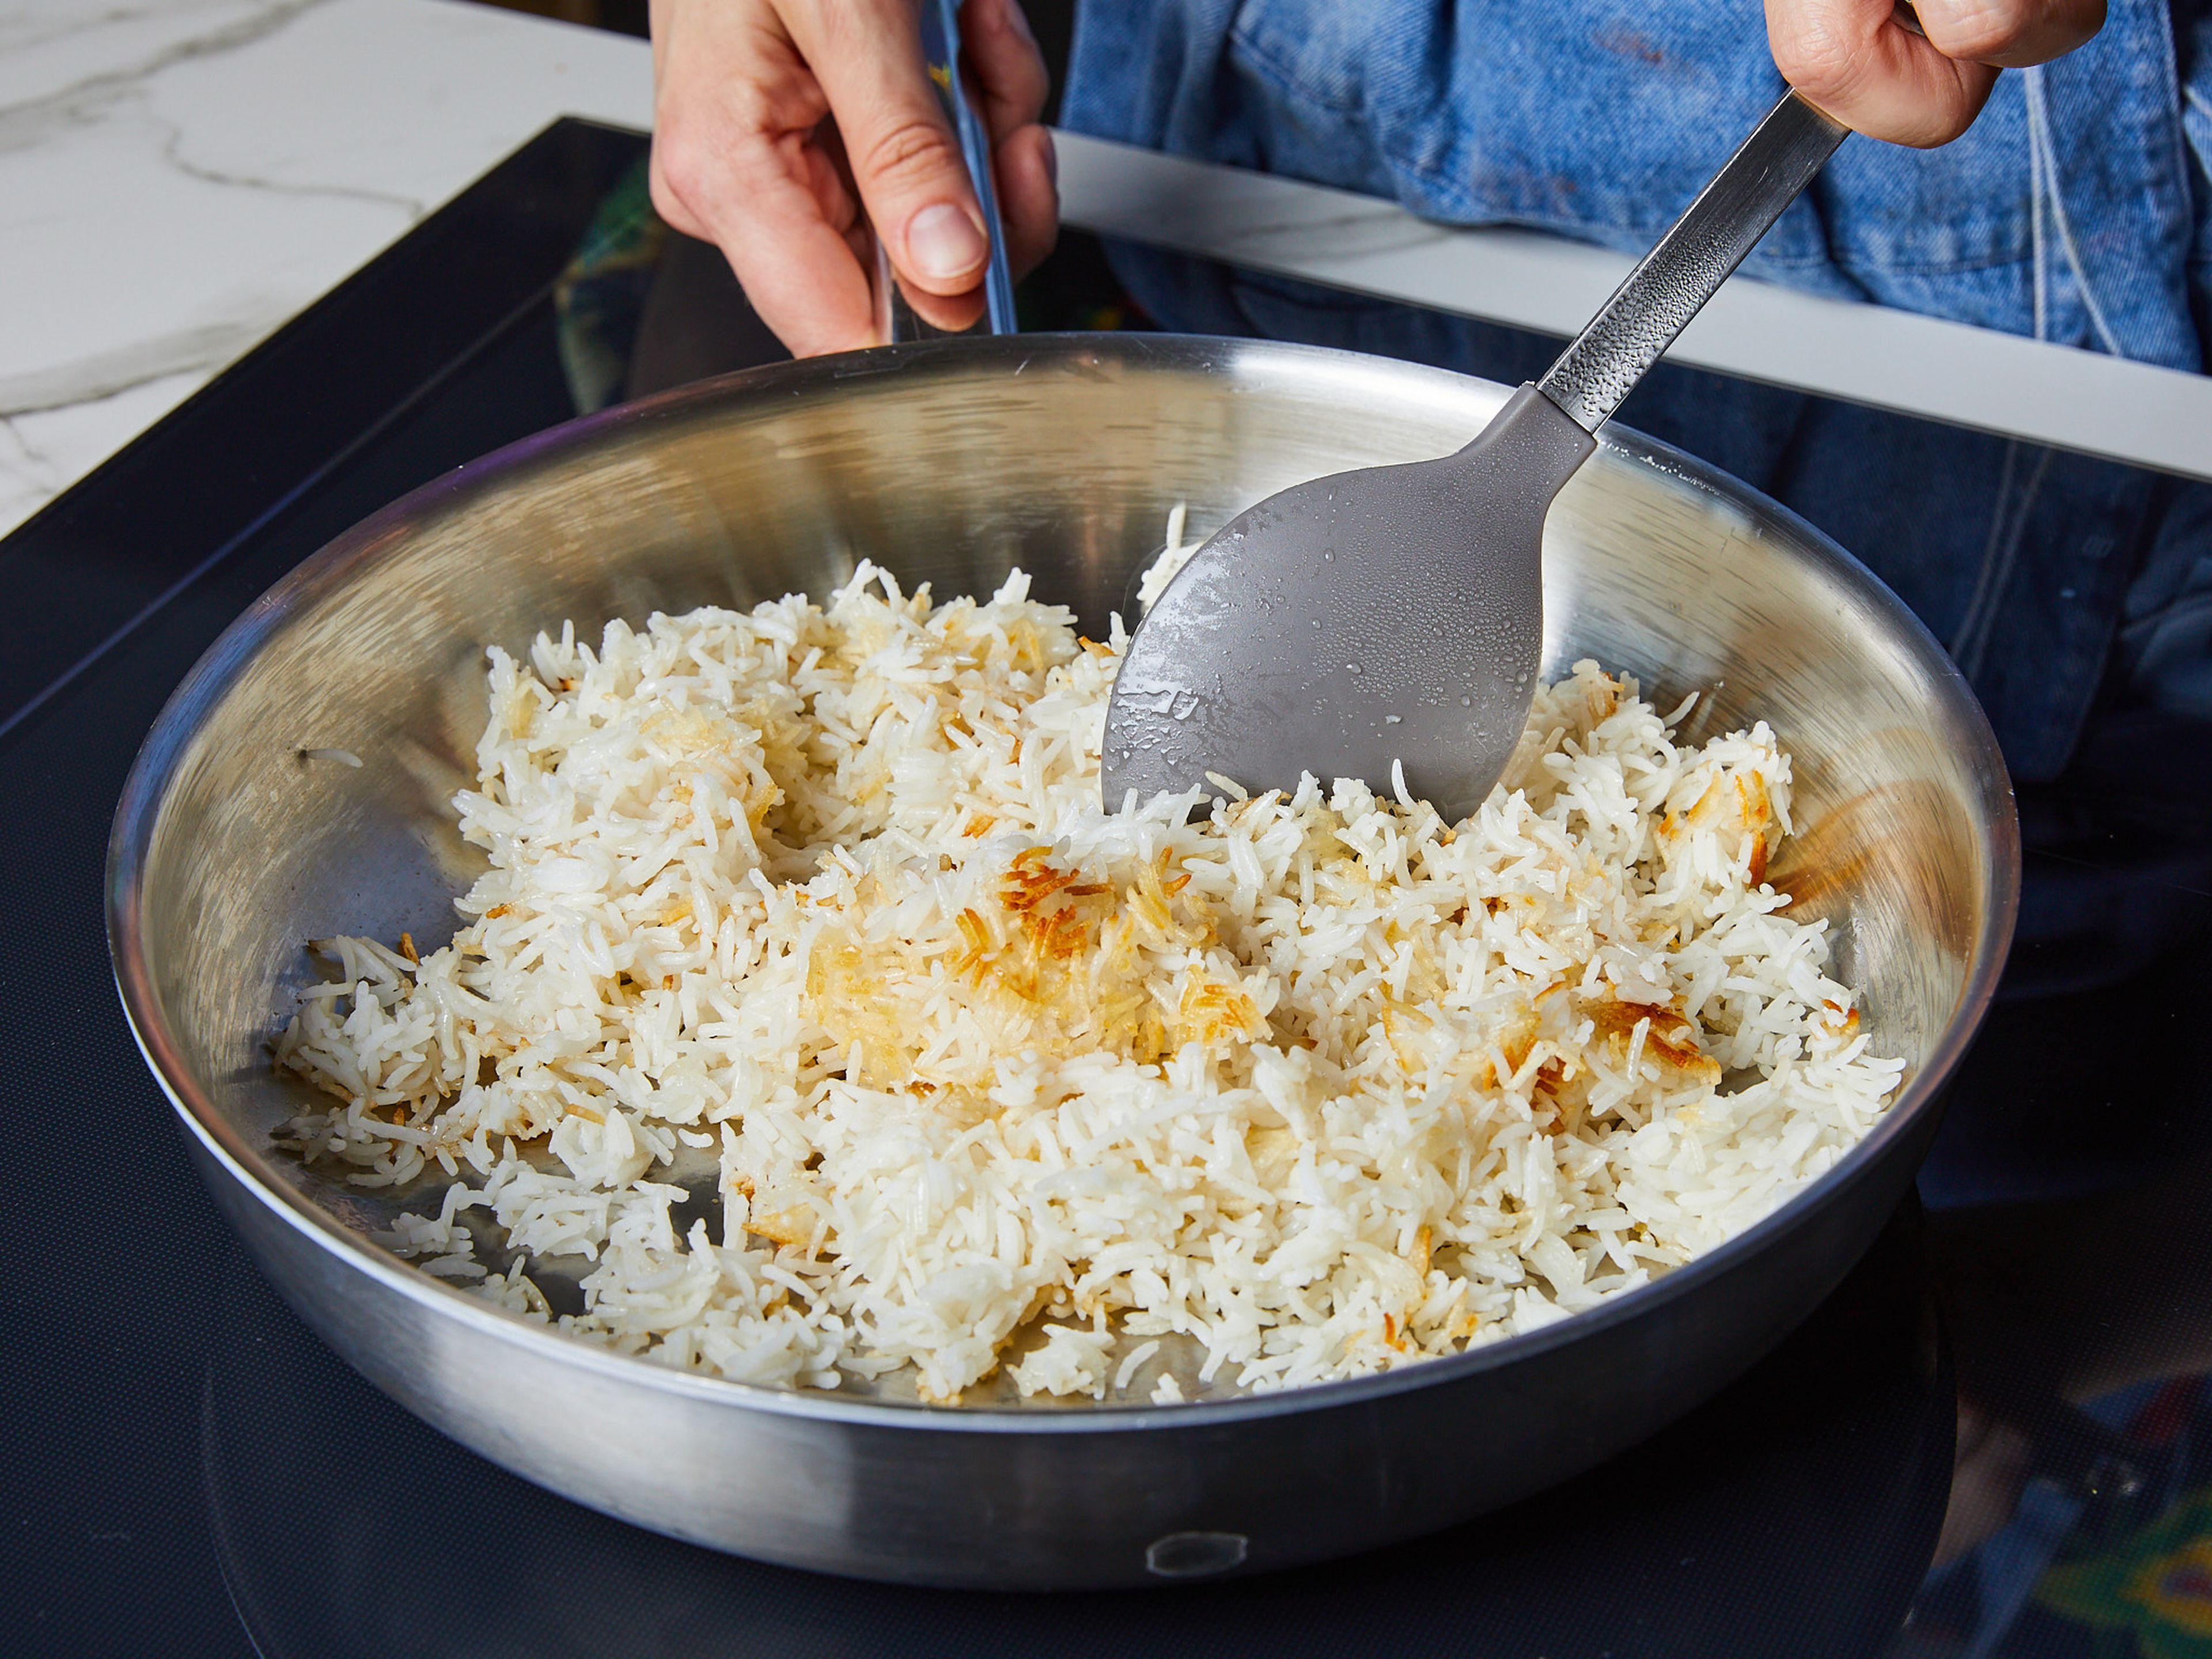 Meanwhile, heat another ¼ of oil in a frying pan, add cooked rice and stir-fry over high heat for approx. 7–10 min. until rice is crispy and golden brown. Be careful not to crush the rice grains. Then add the vegetables to the baking sheet and bake everything for another 8–10 min.